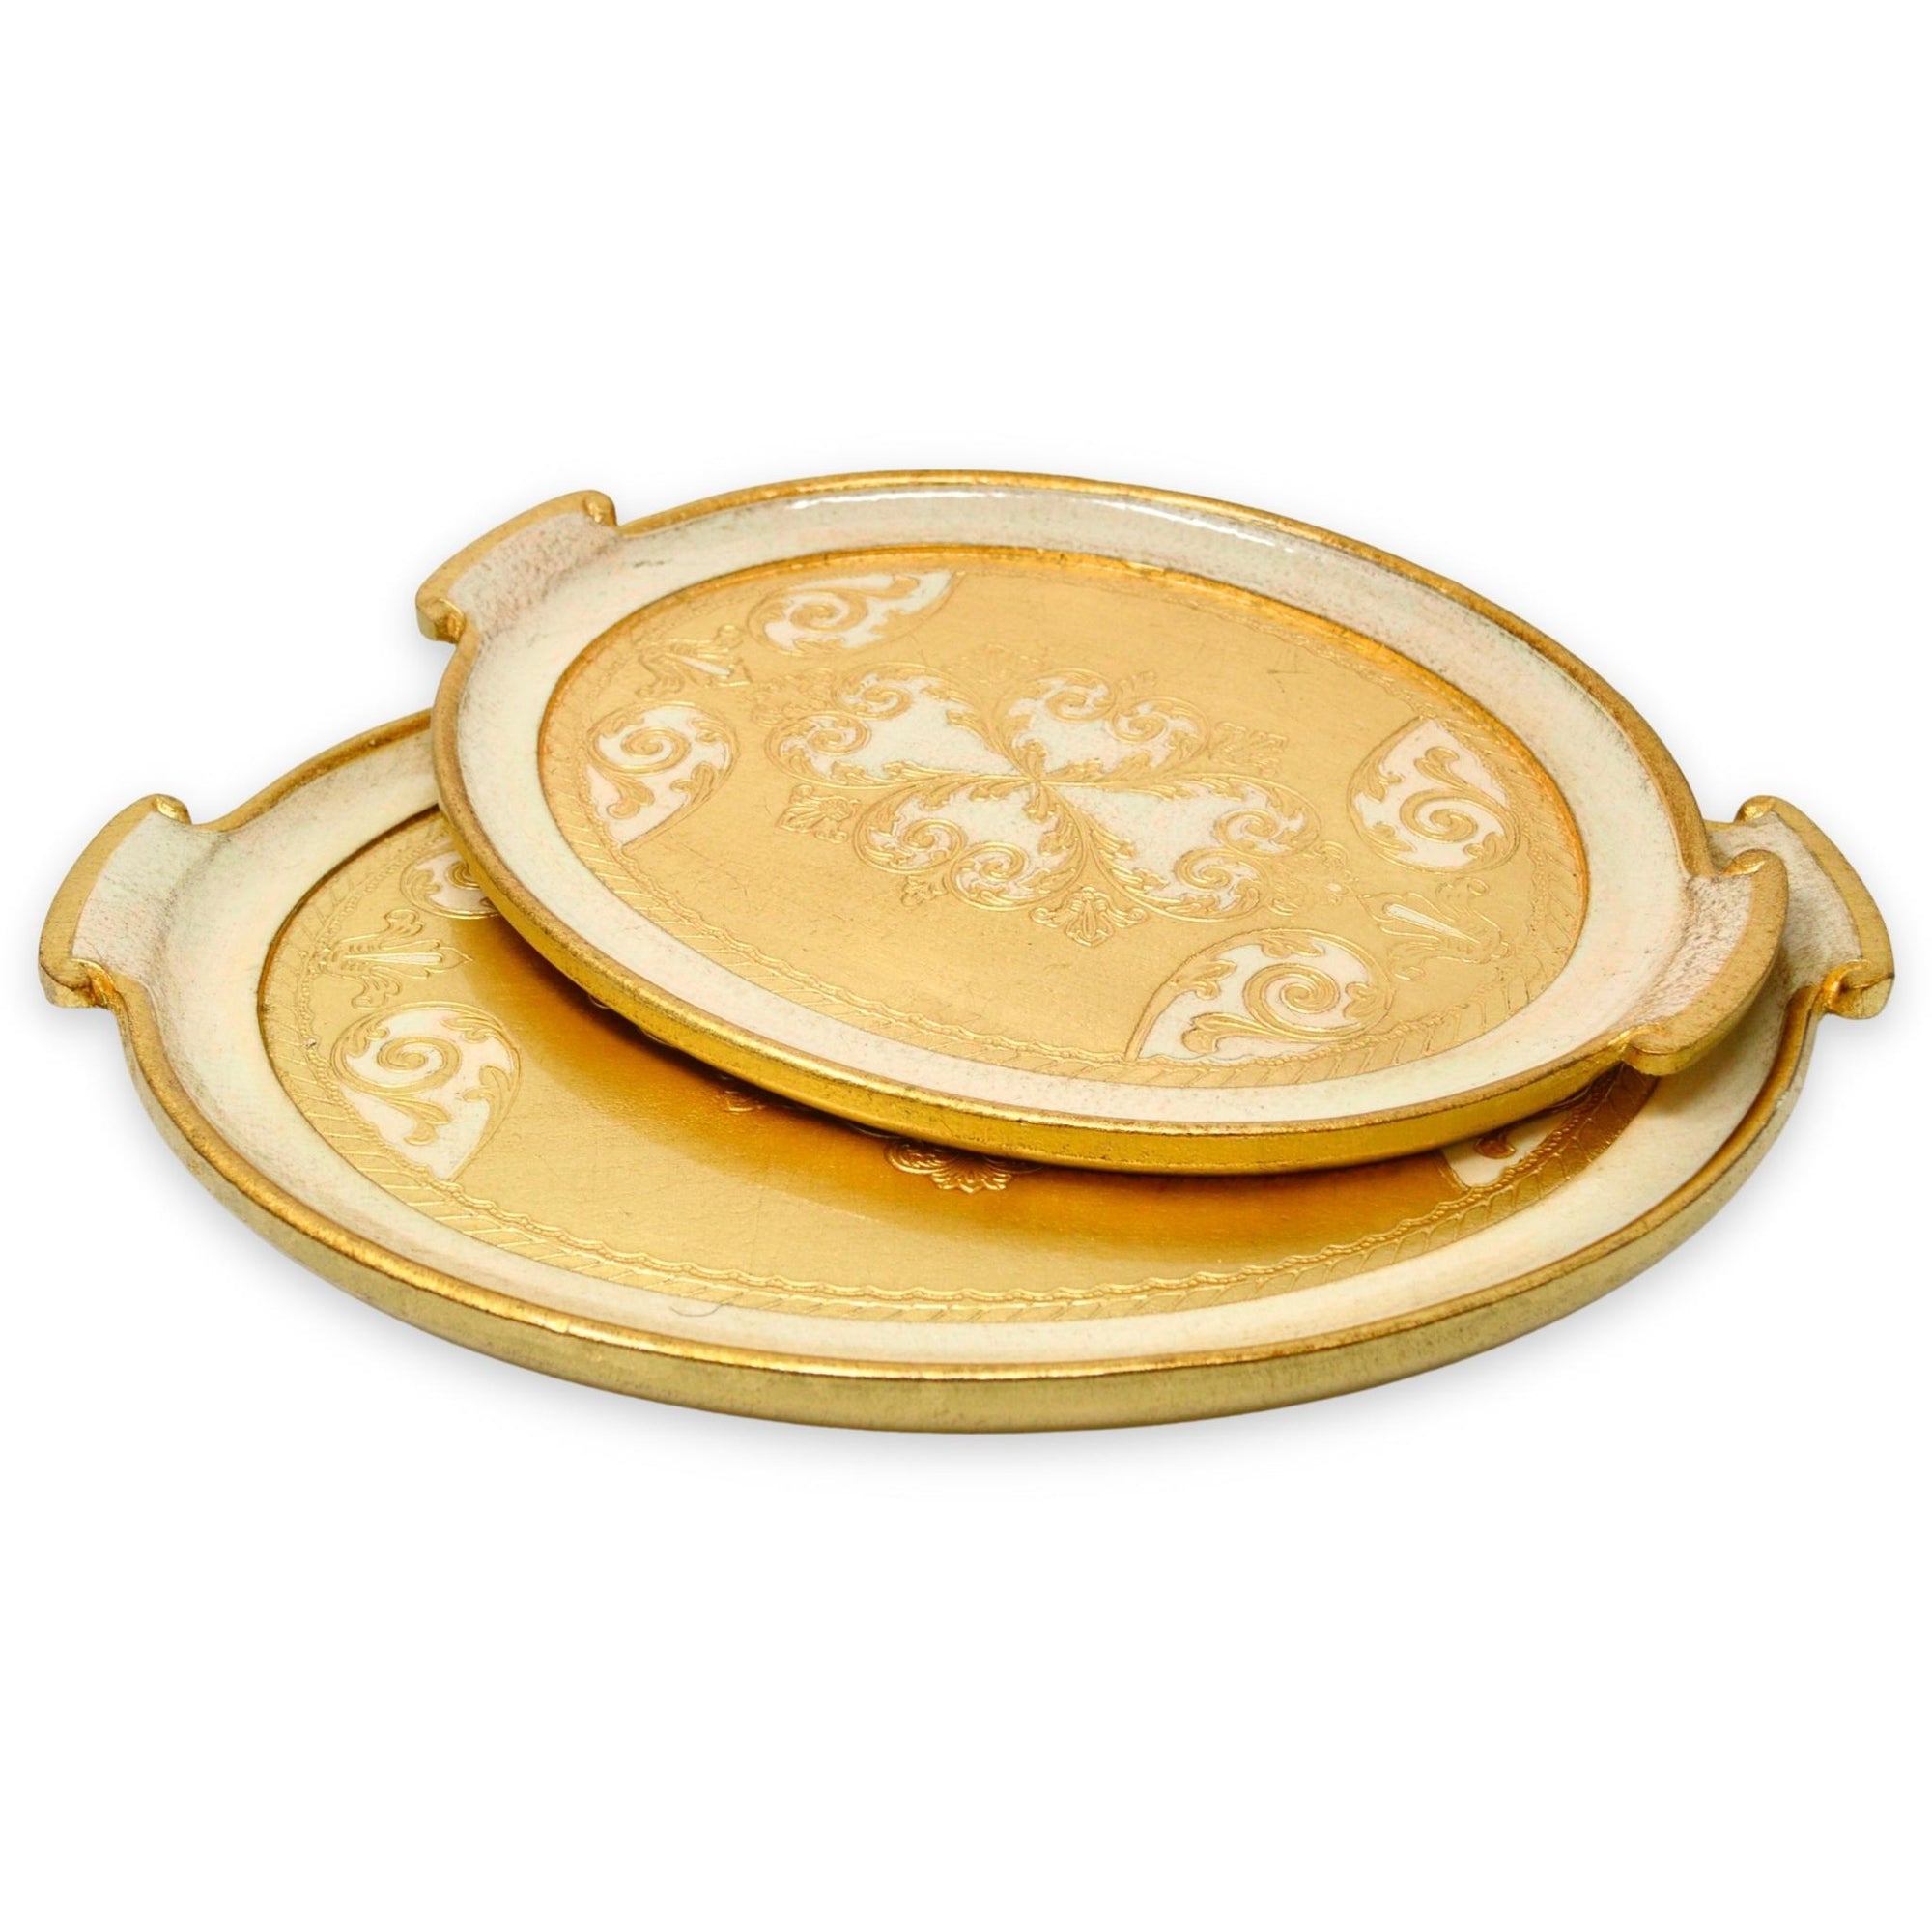 Florentine Carved Gilded Wood, Oval with Handle Trays, Cappuccino, Choice of size - My Italian Decor